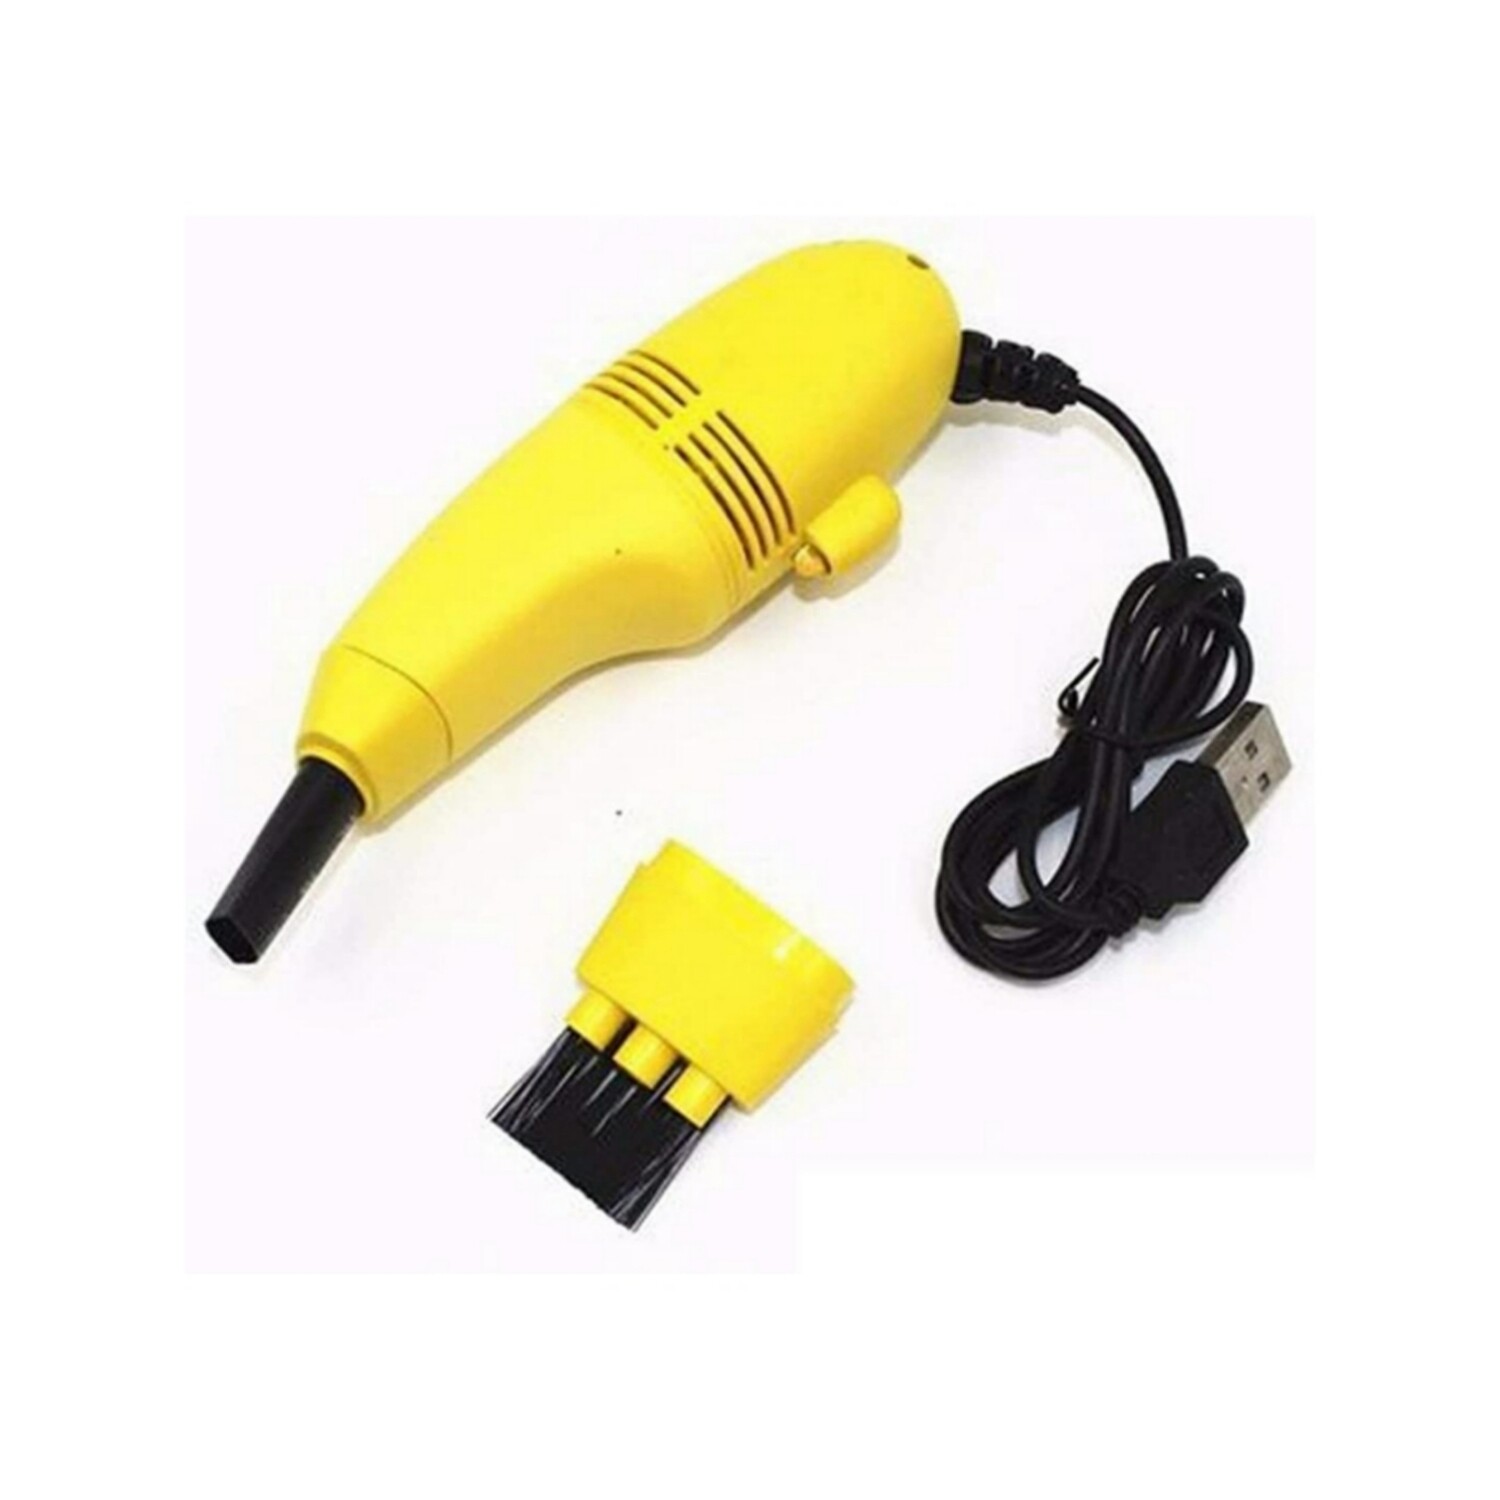 Mini USB Vacuum Cleaner Brush Dust Cleaning Kit for Computer Keyboard PC Laptop